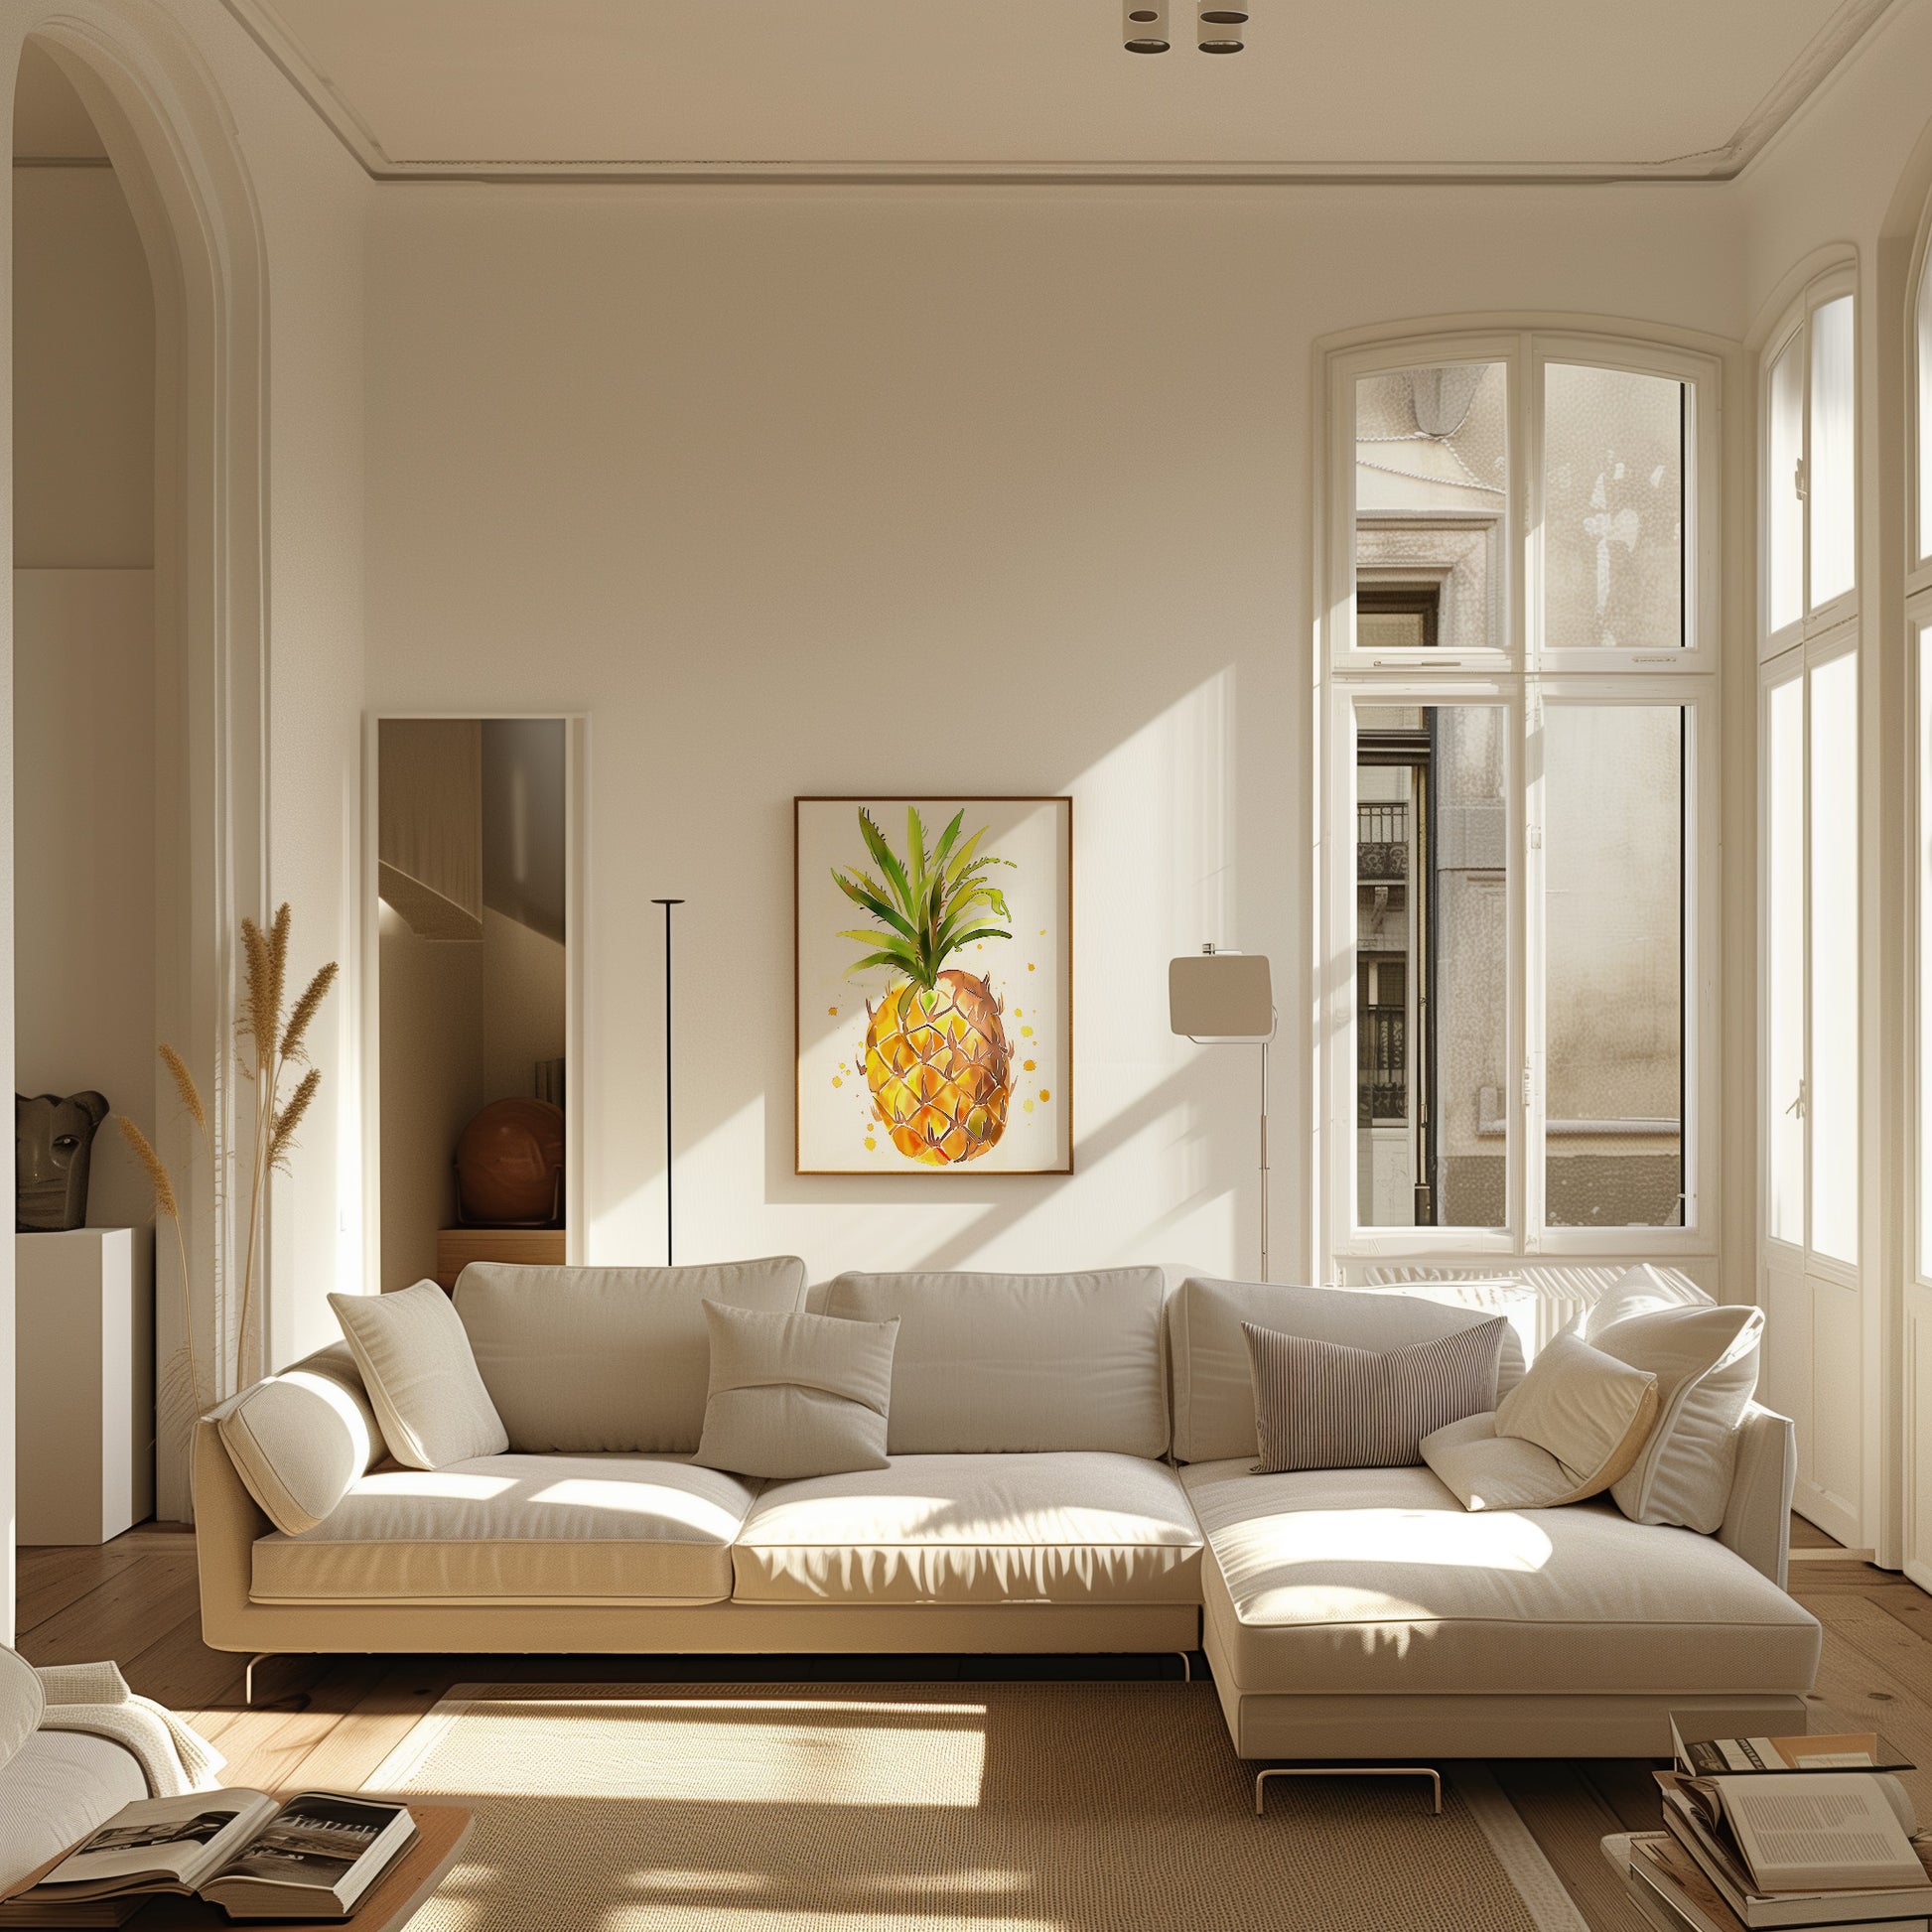 A bright, cozy living room with a white sofa and a pineapple painting on the wall.